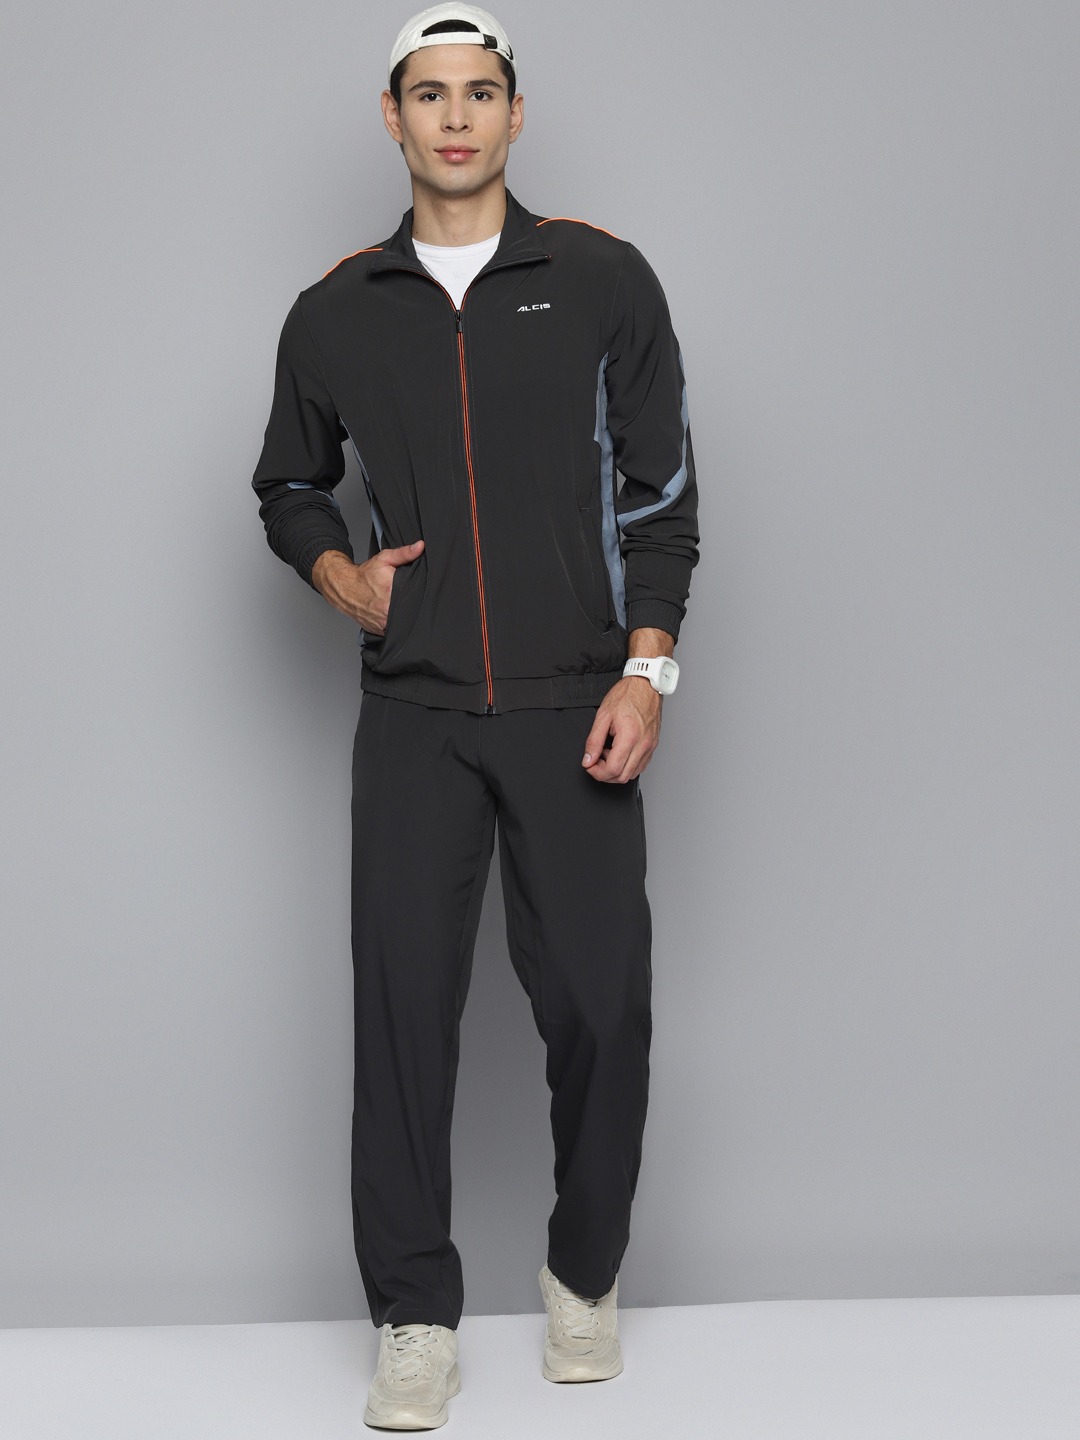 Clothing Tracksuits | Alcis Men Charcoal Grey Solid Tracksuits - LR80262